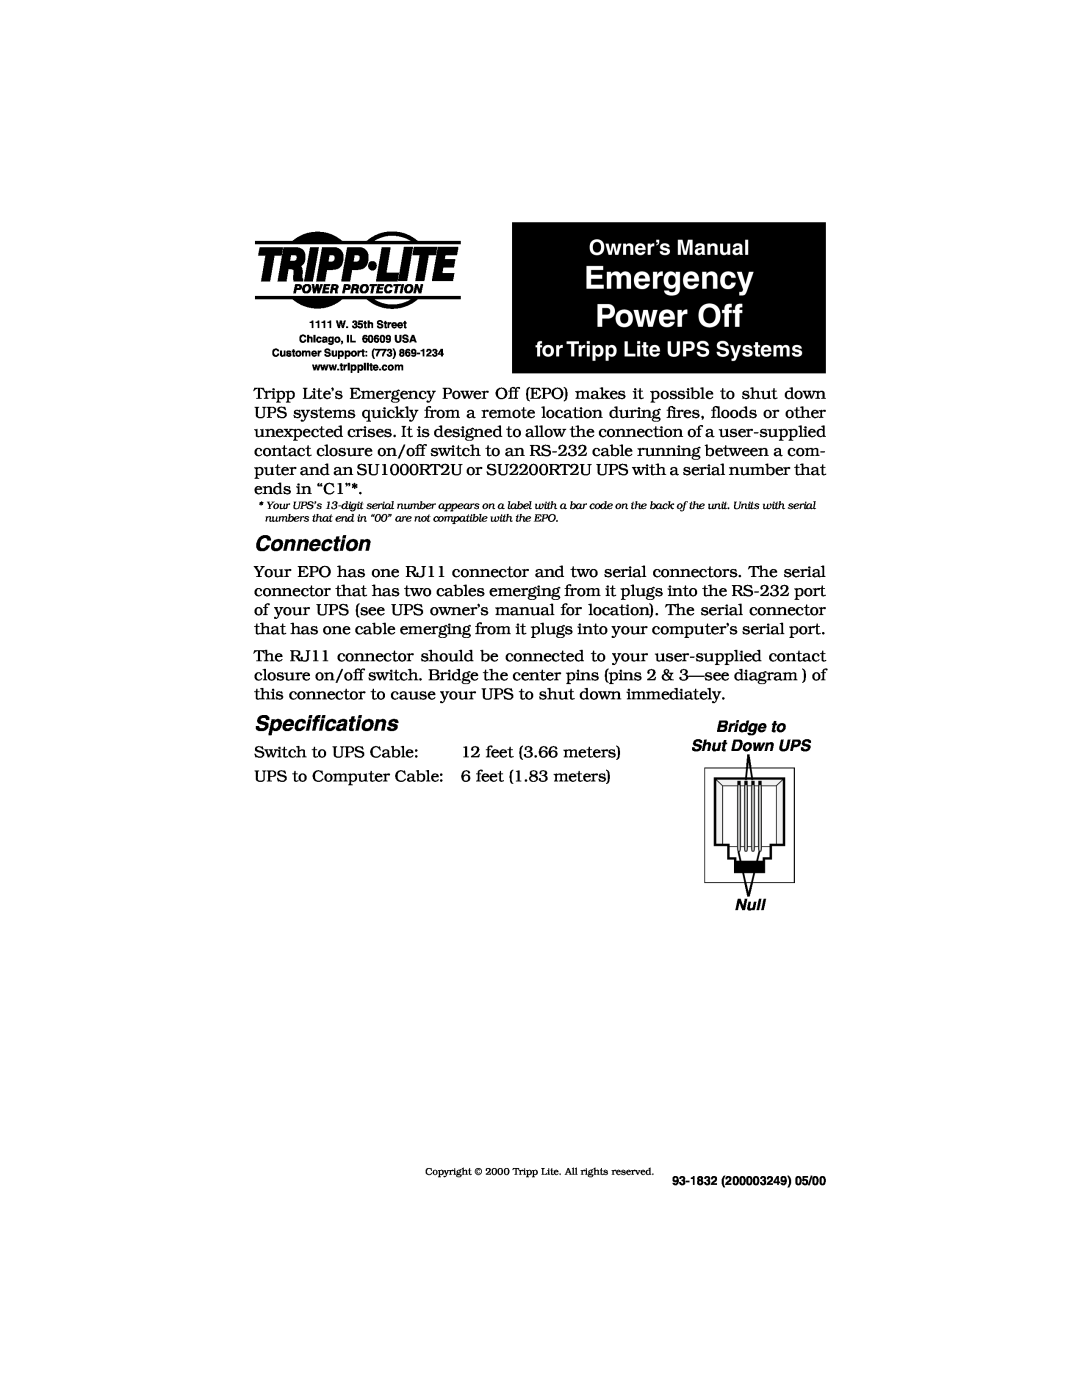 Tripp Lite SU1000RT2U owner manual Emergency Power Off, Owner’s Manual, for Tripp Lite UPS Systems, Connection, Bridge to 